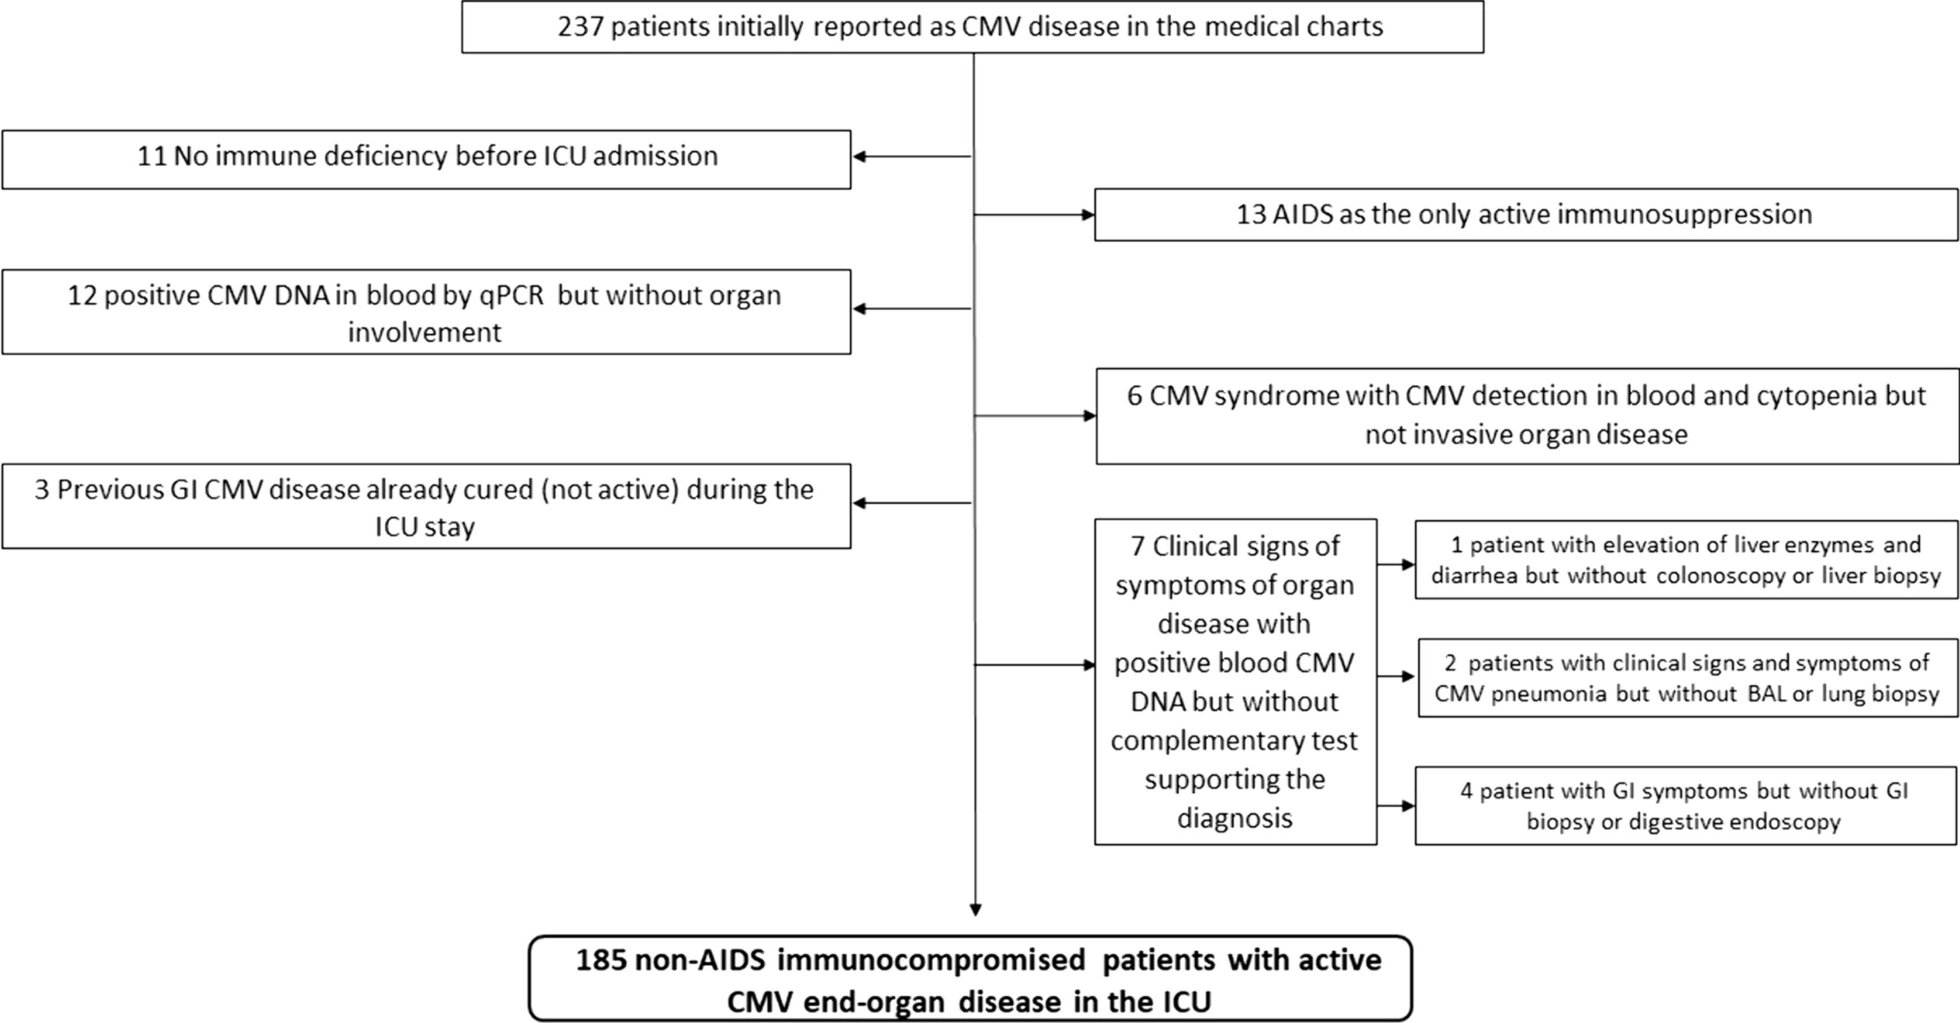 Clinical characteristics and outcomes of immunocompromised critically ill patients with cytomegalovirus end-organ disease: a multicenter retrospective cohort study